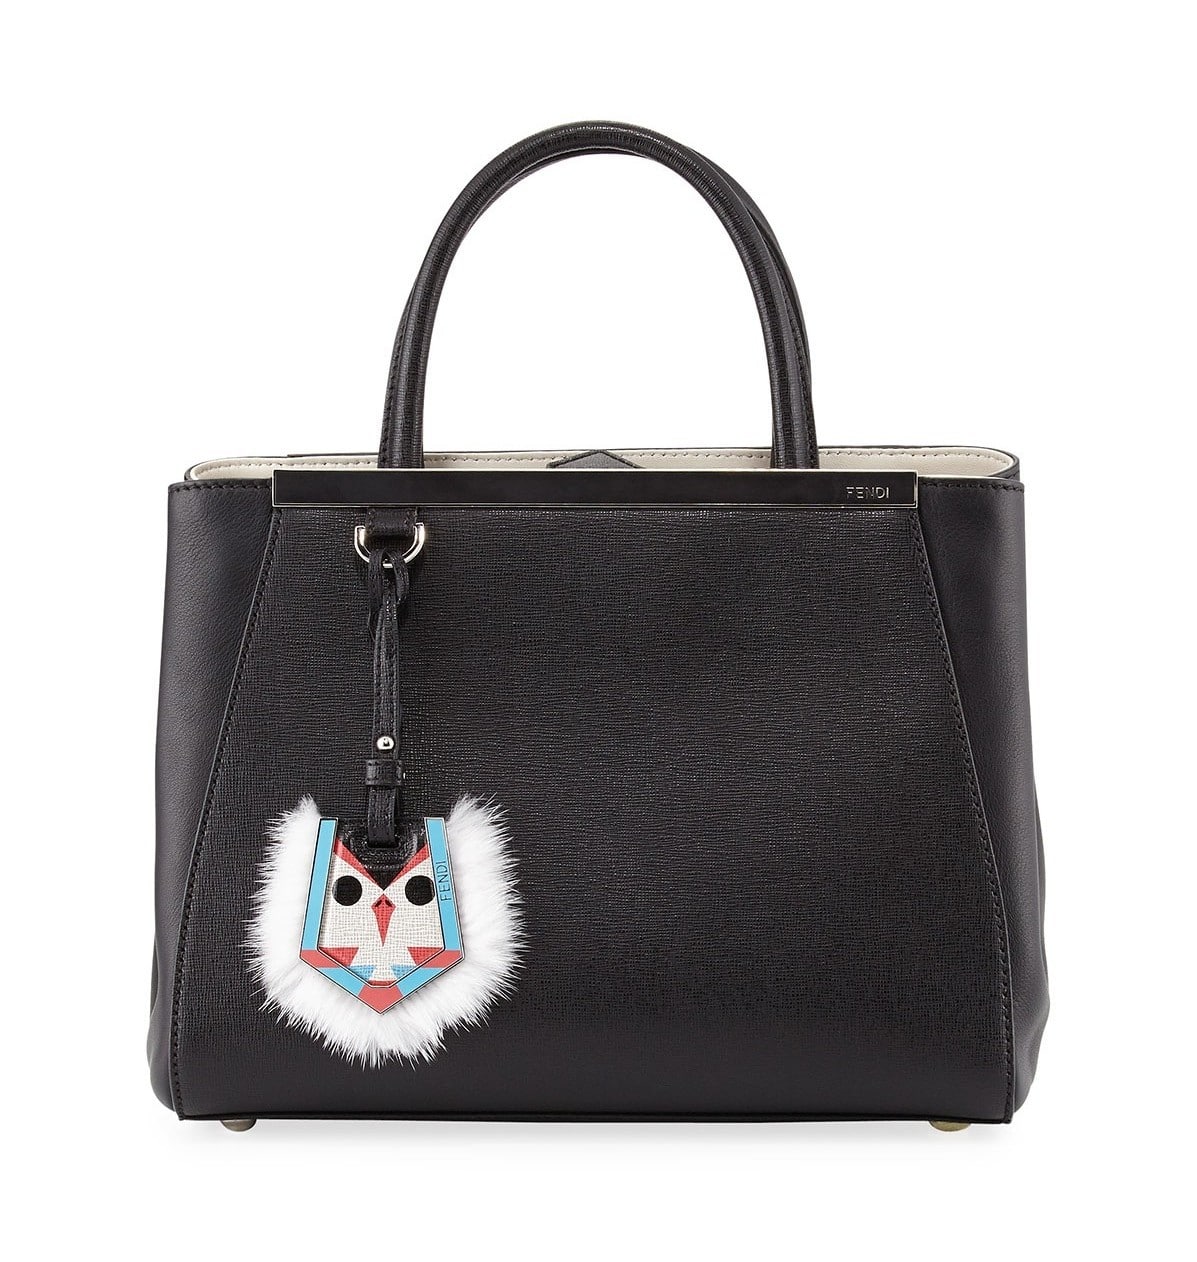 Fendi Resort 2015 Bag Collection features new Monster Bag styles ...